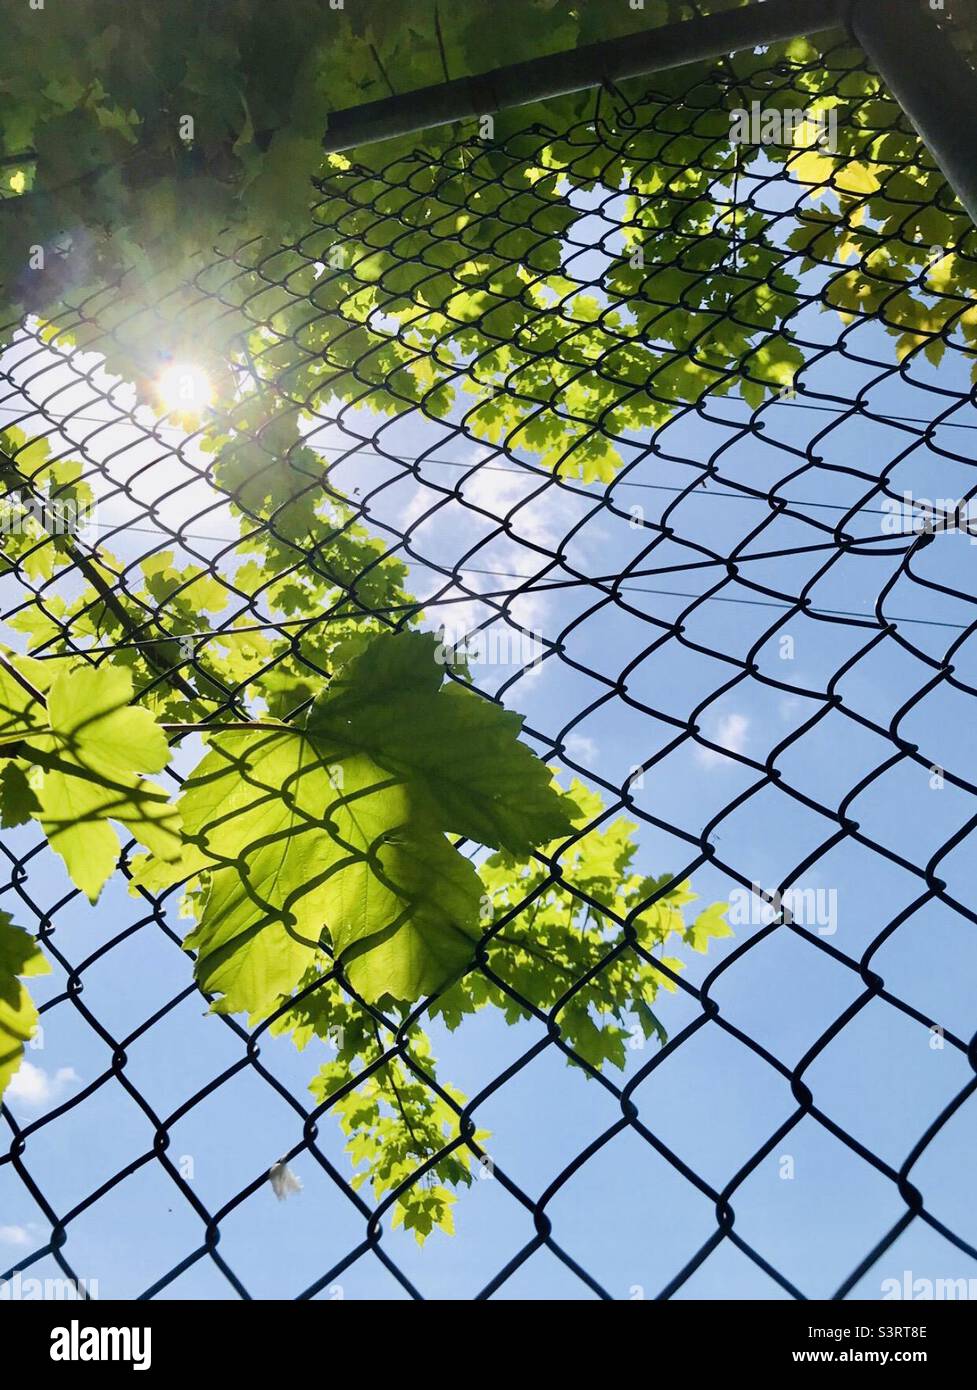 Sun shining through leaves and chain link fencing Stock Photo